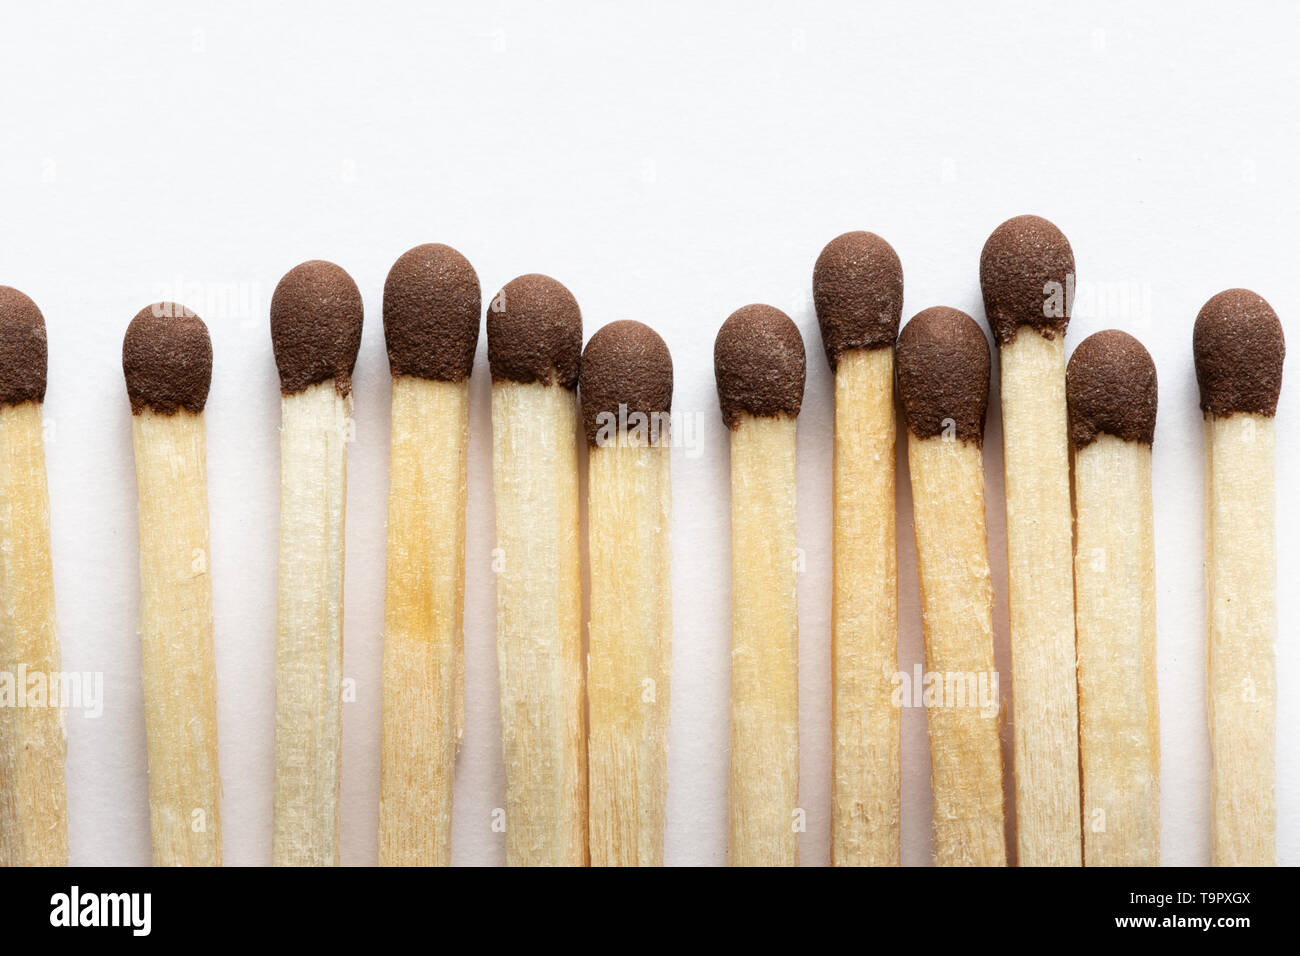 Wooden matches with brown heads, closeup on a light background Stock Photo